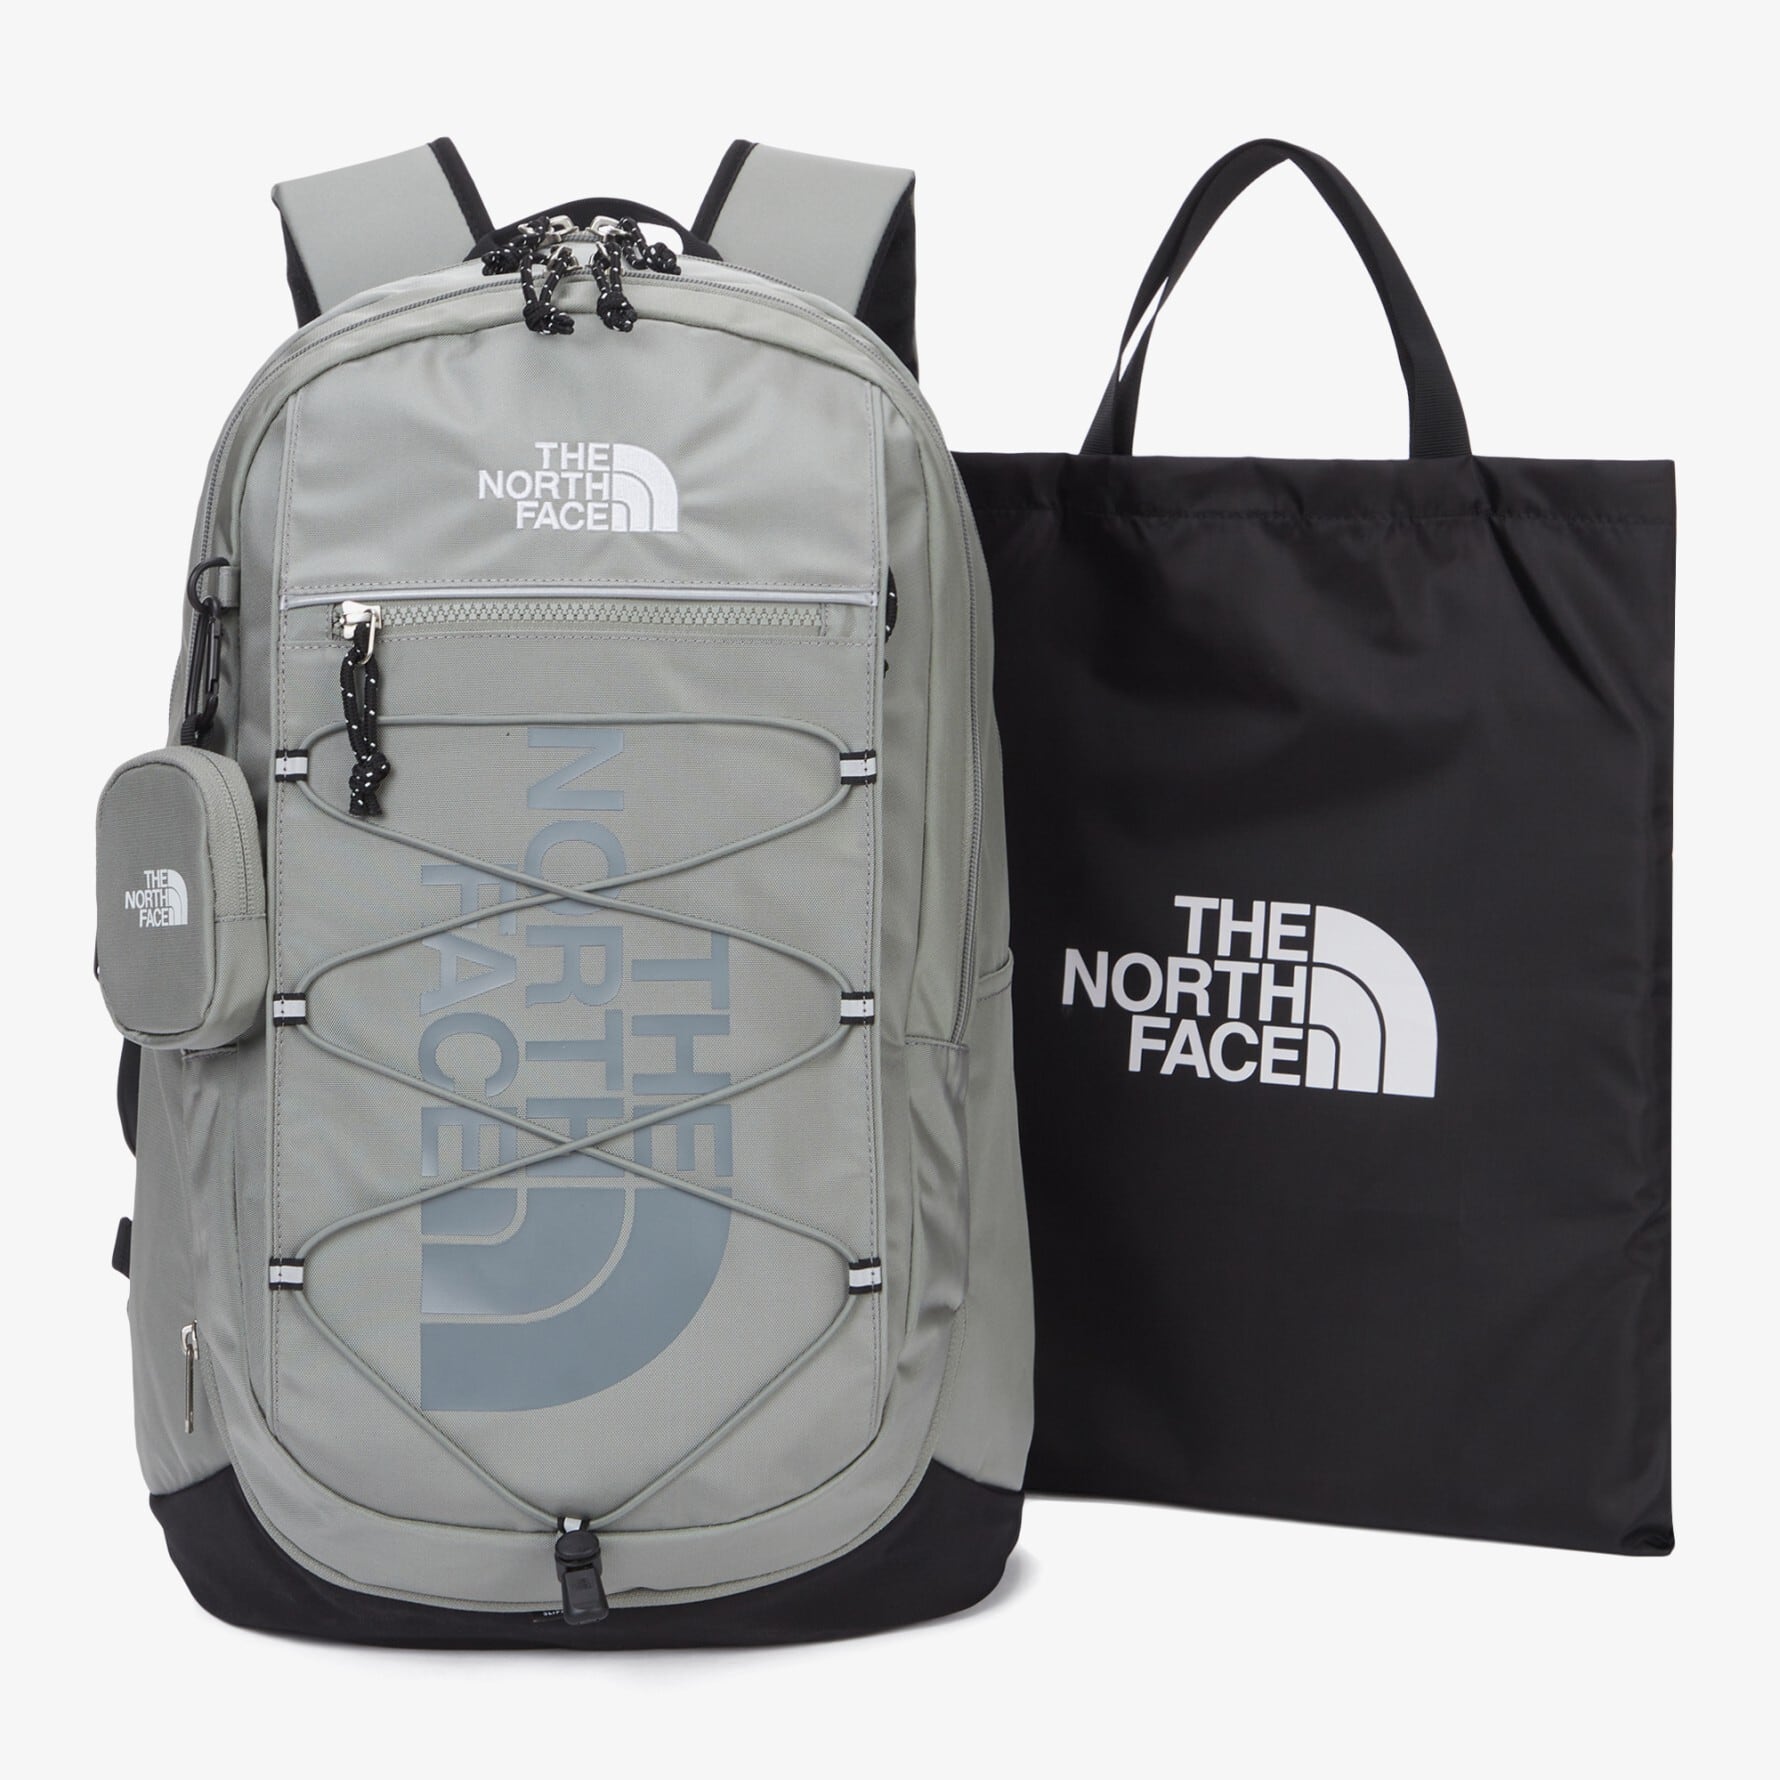 THE NORTHFACE SUPER PACK 30L